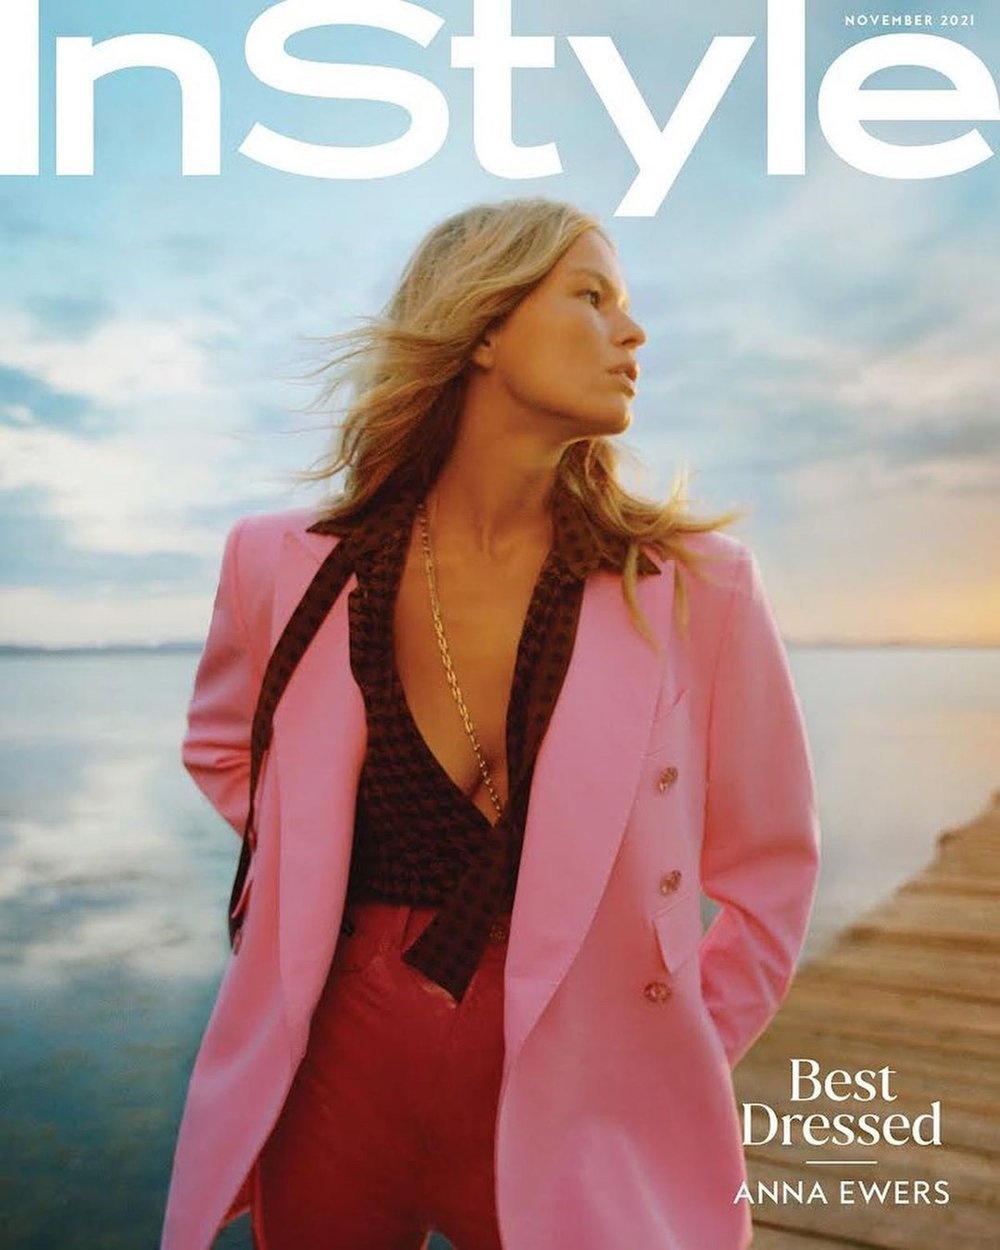 Instyle Us November 2021 Cover Story Editorial